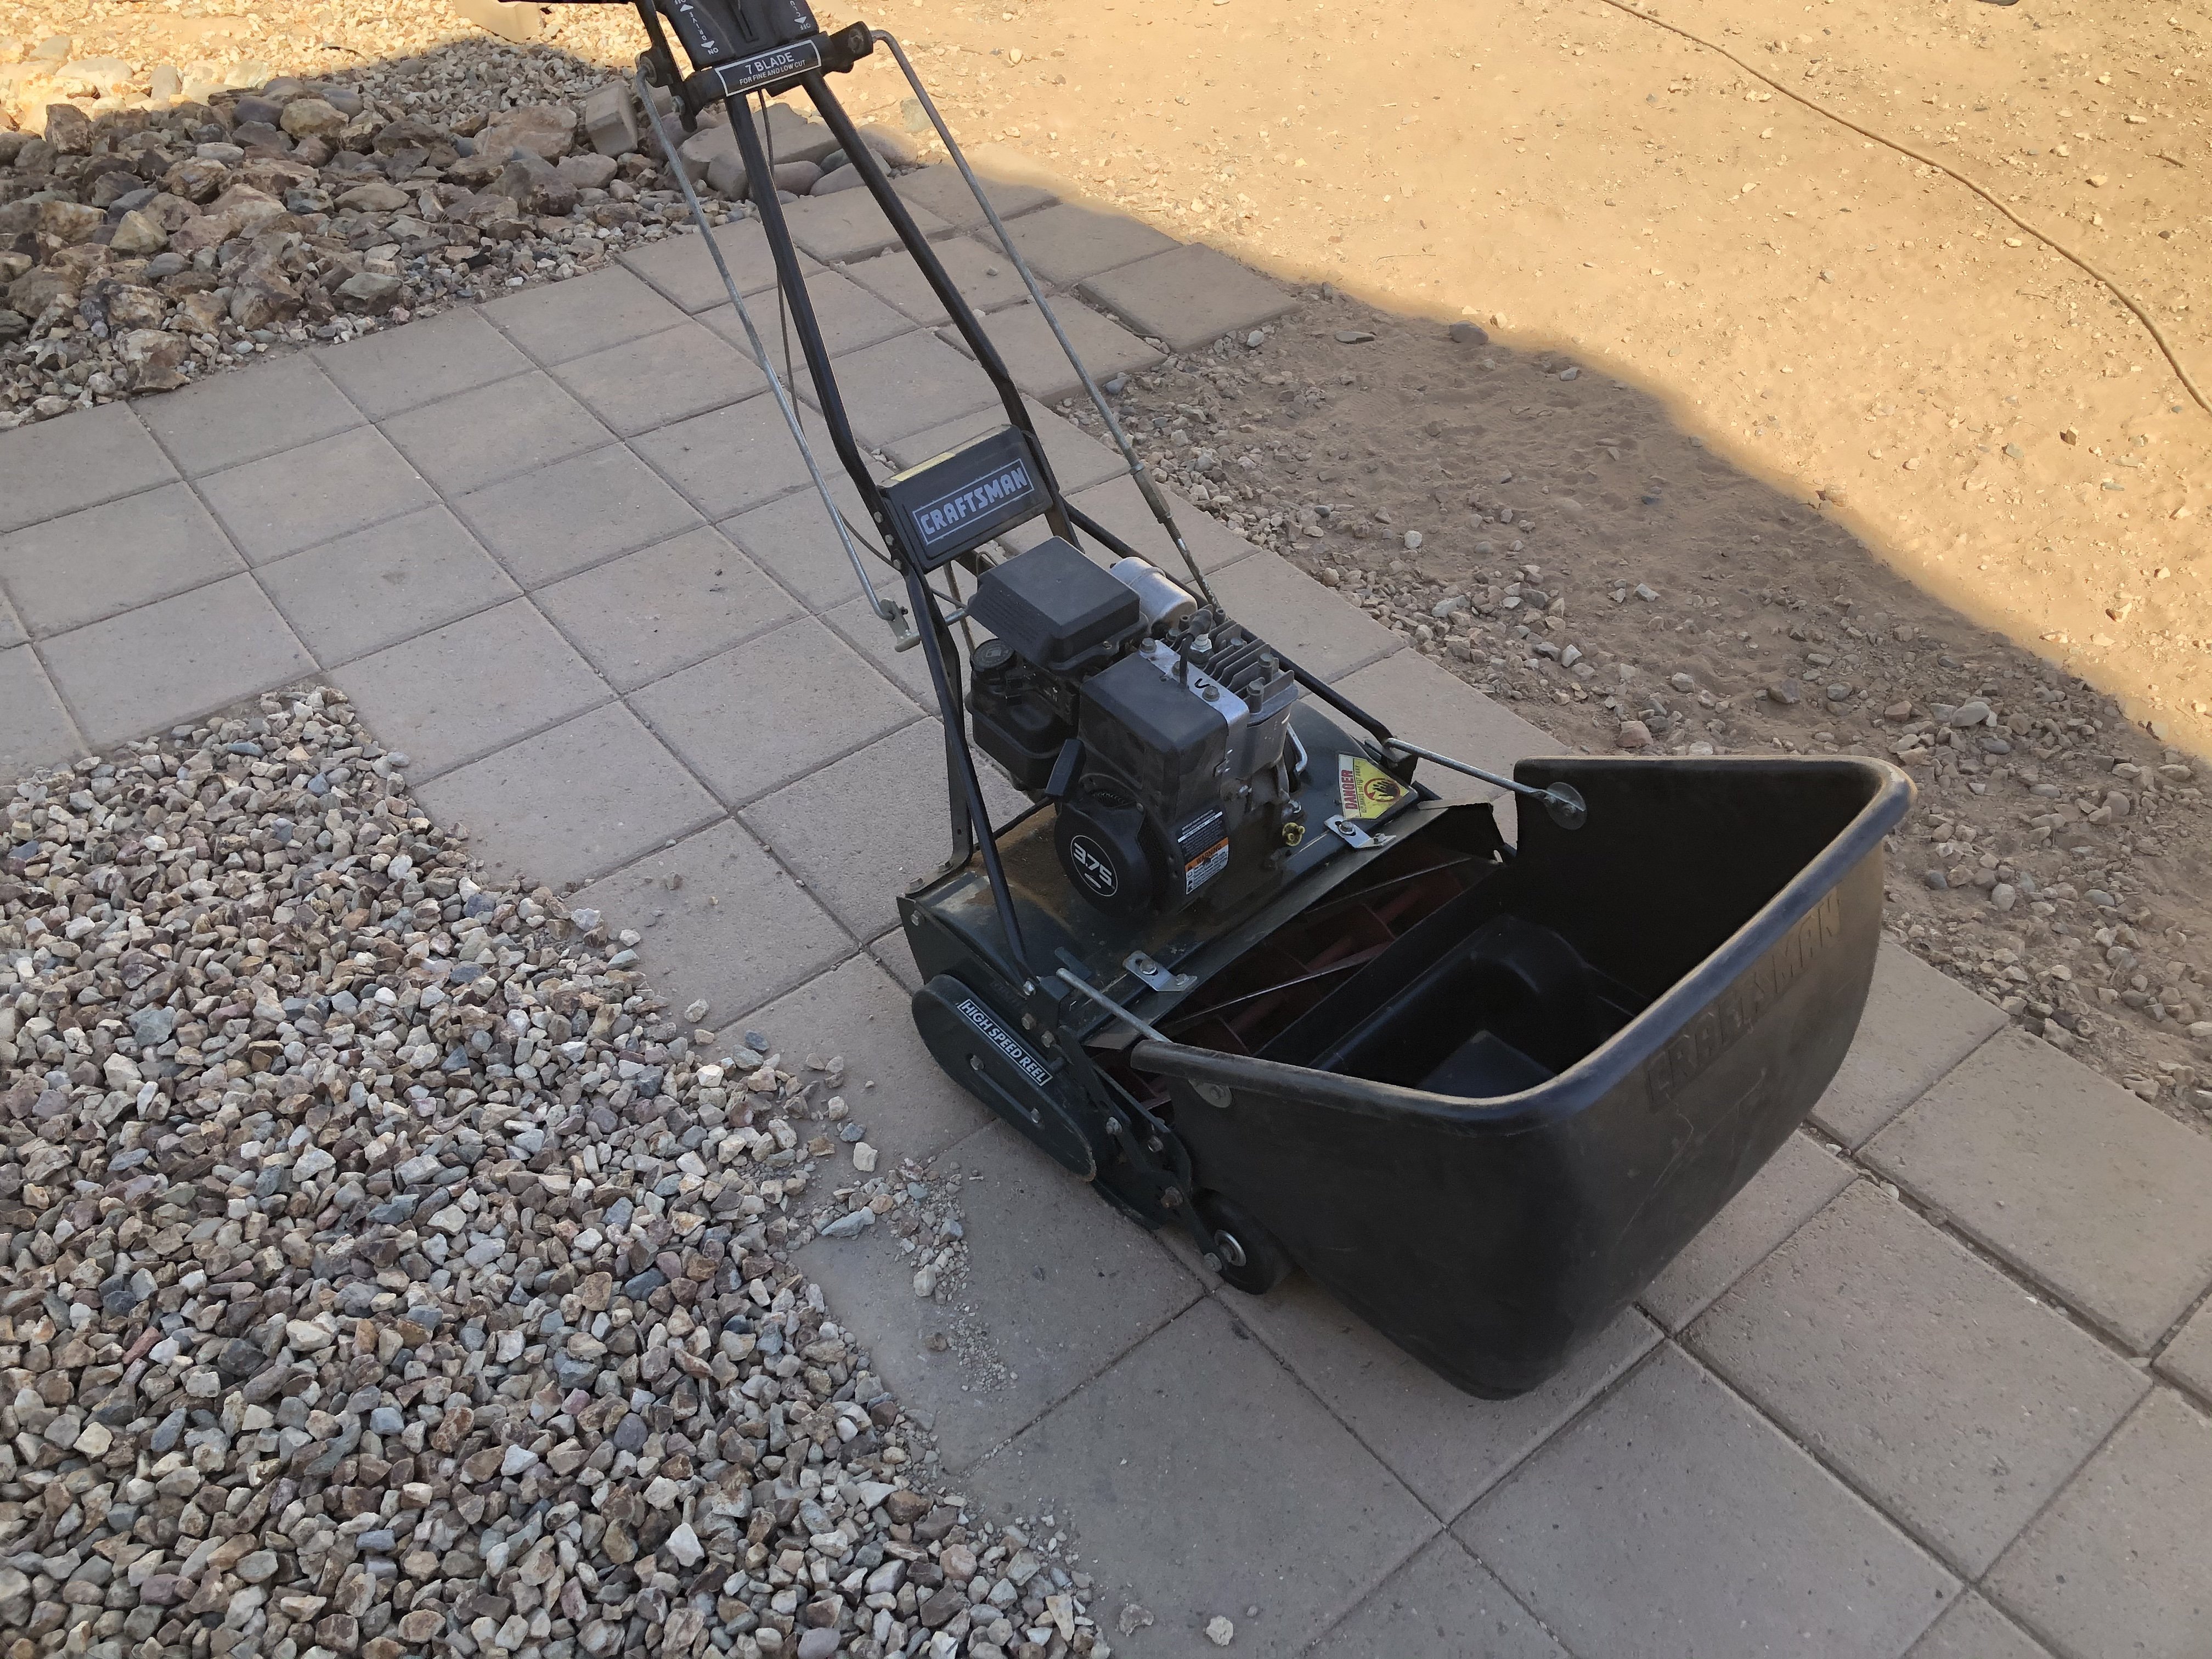 Craftsman reel mower - Classified Ads -  Discussion forum